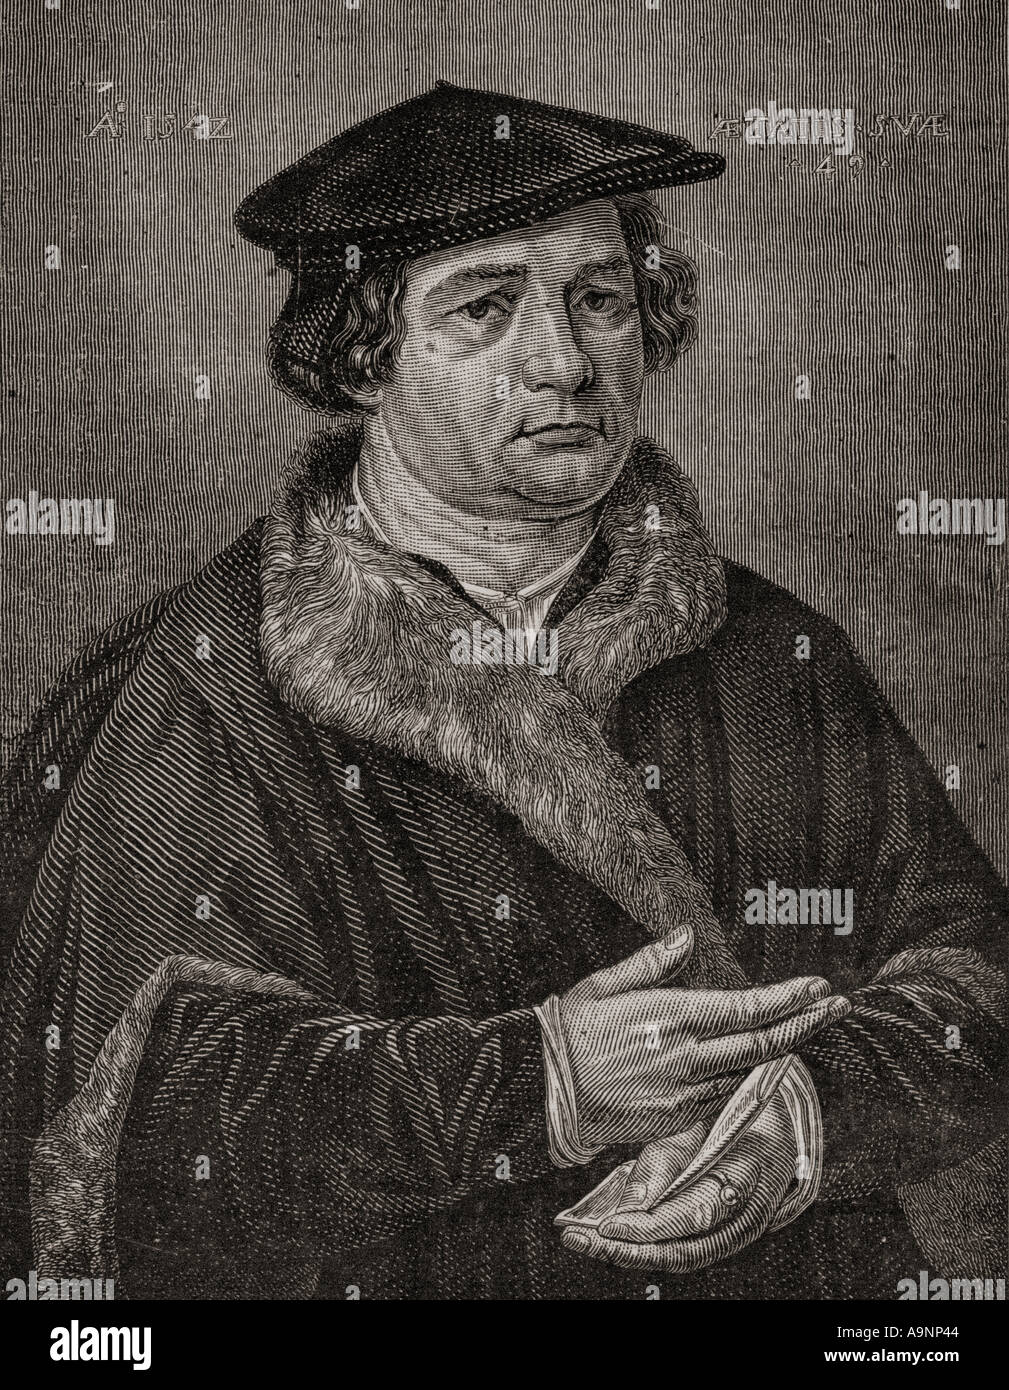 Martin Luther, 1483 - 1546. German professor of theology, composer, priest, monk. Stock Photo